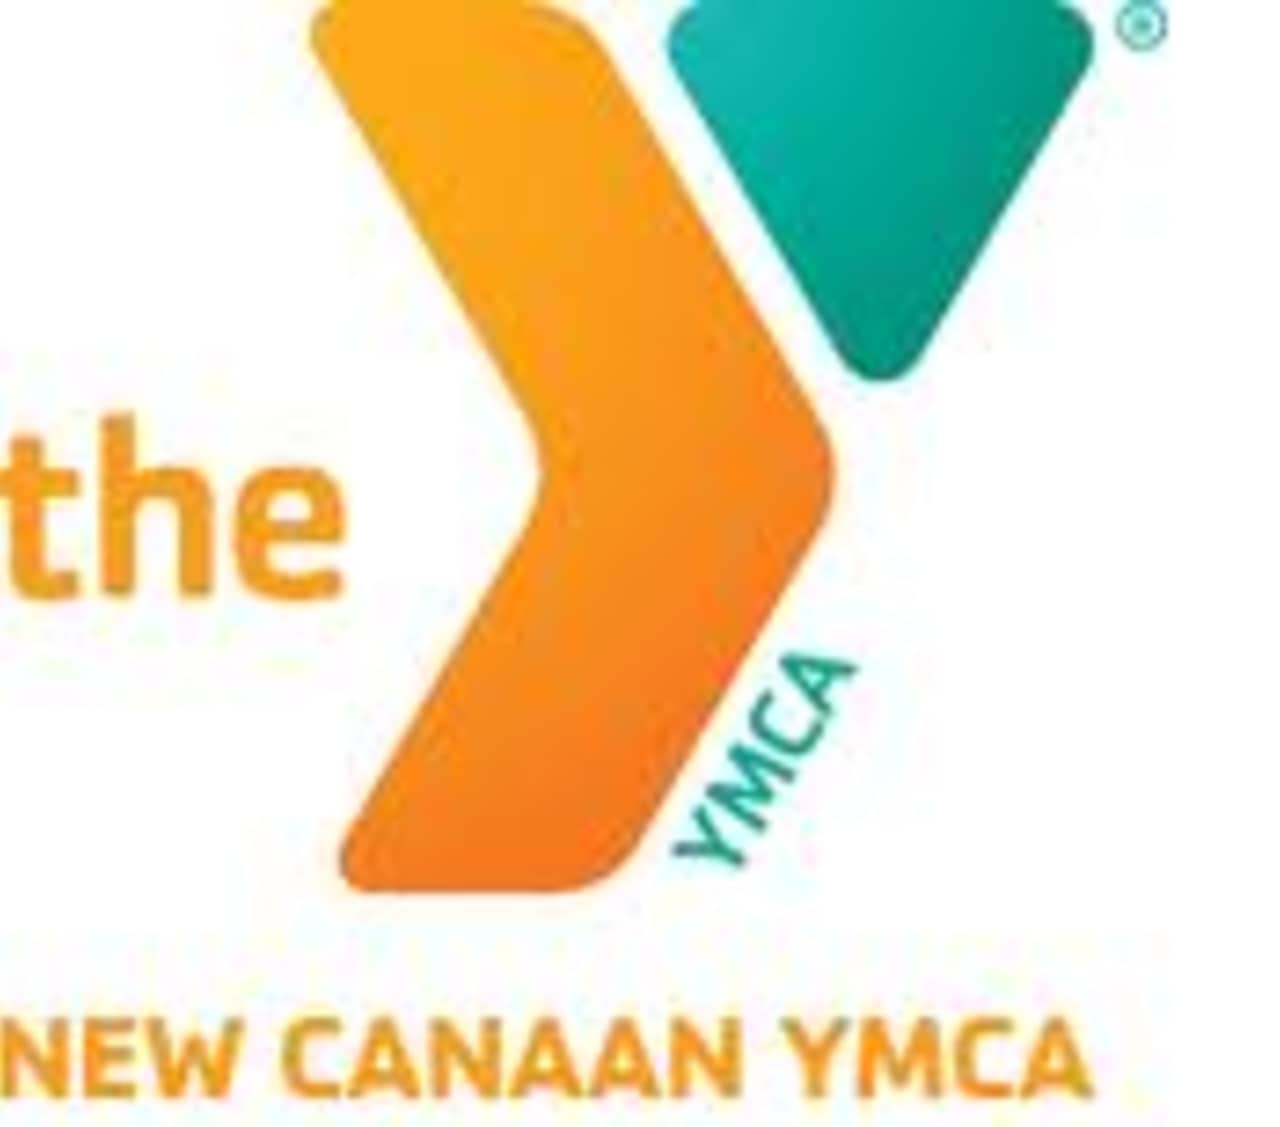 The New Canaan YMCA has several new and returning programs available.